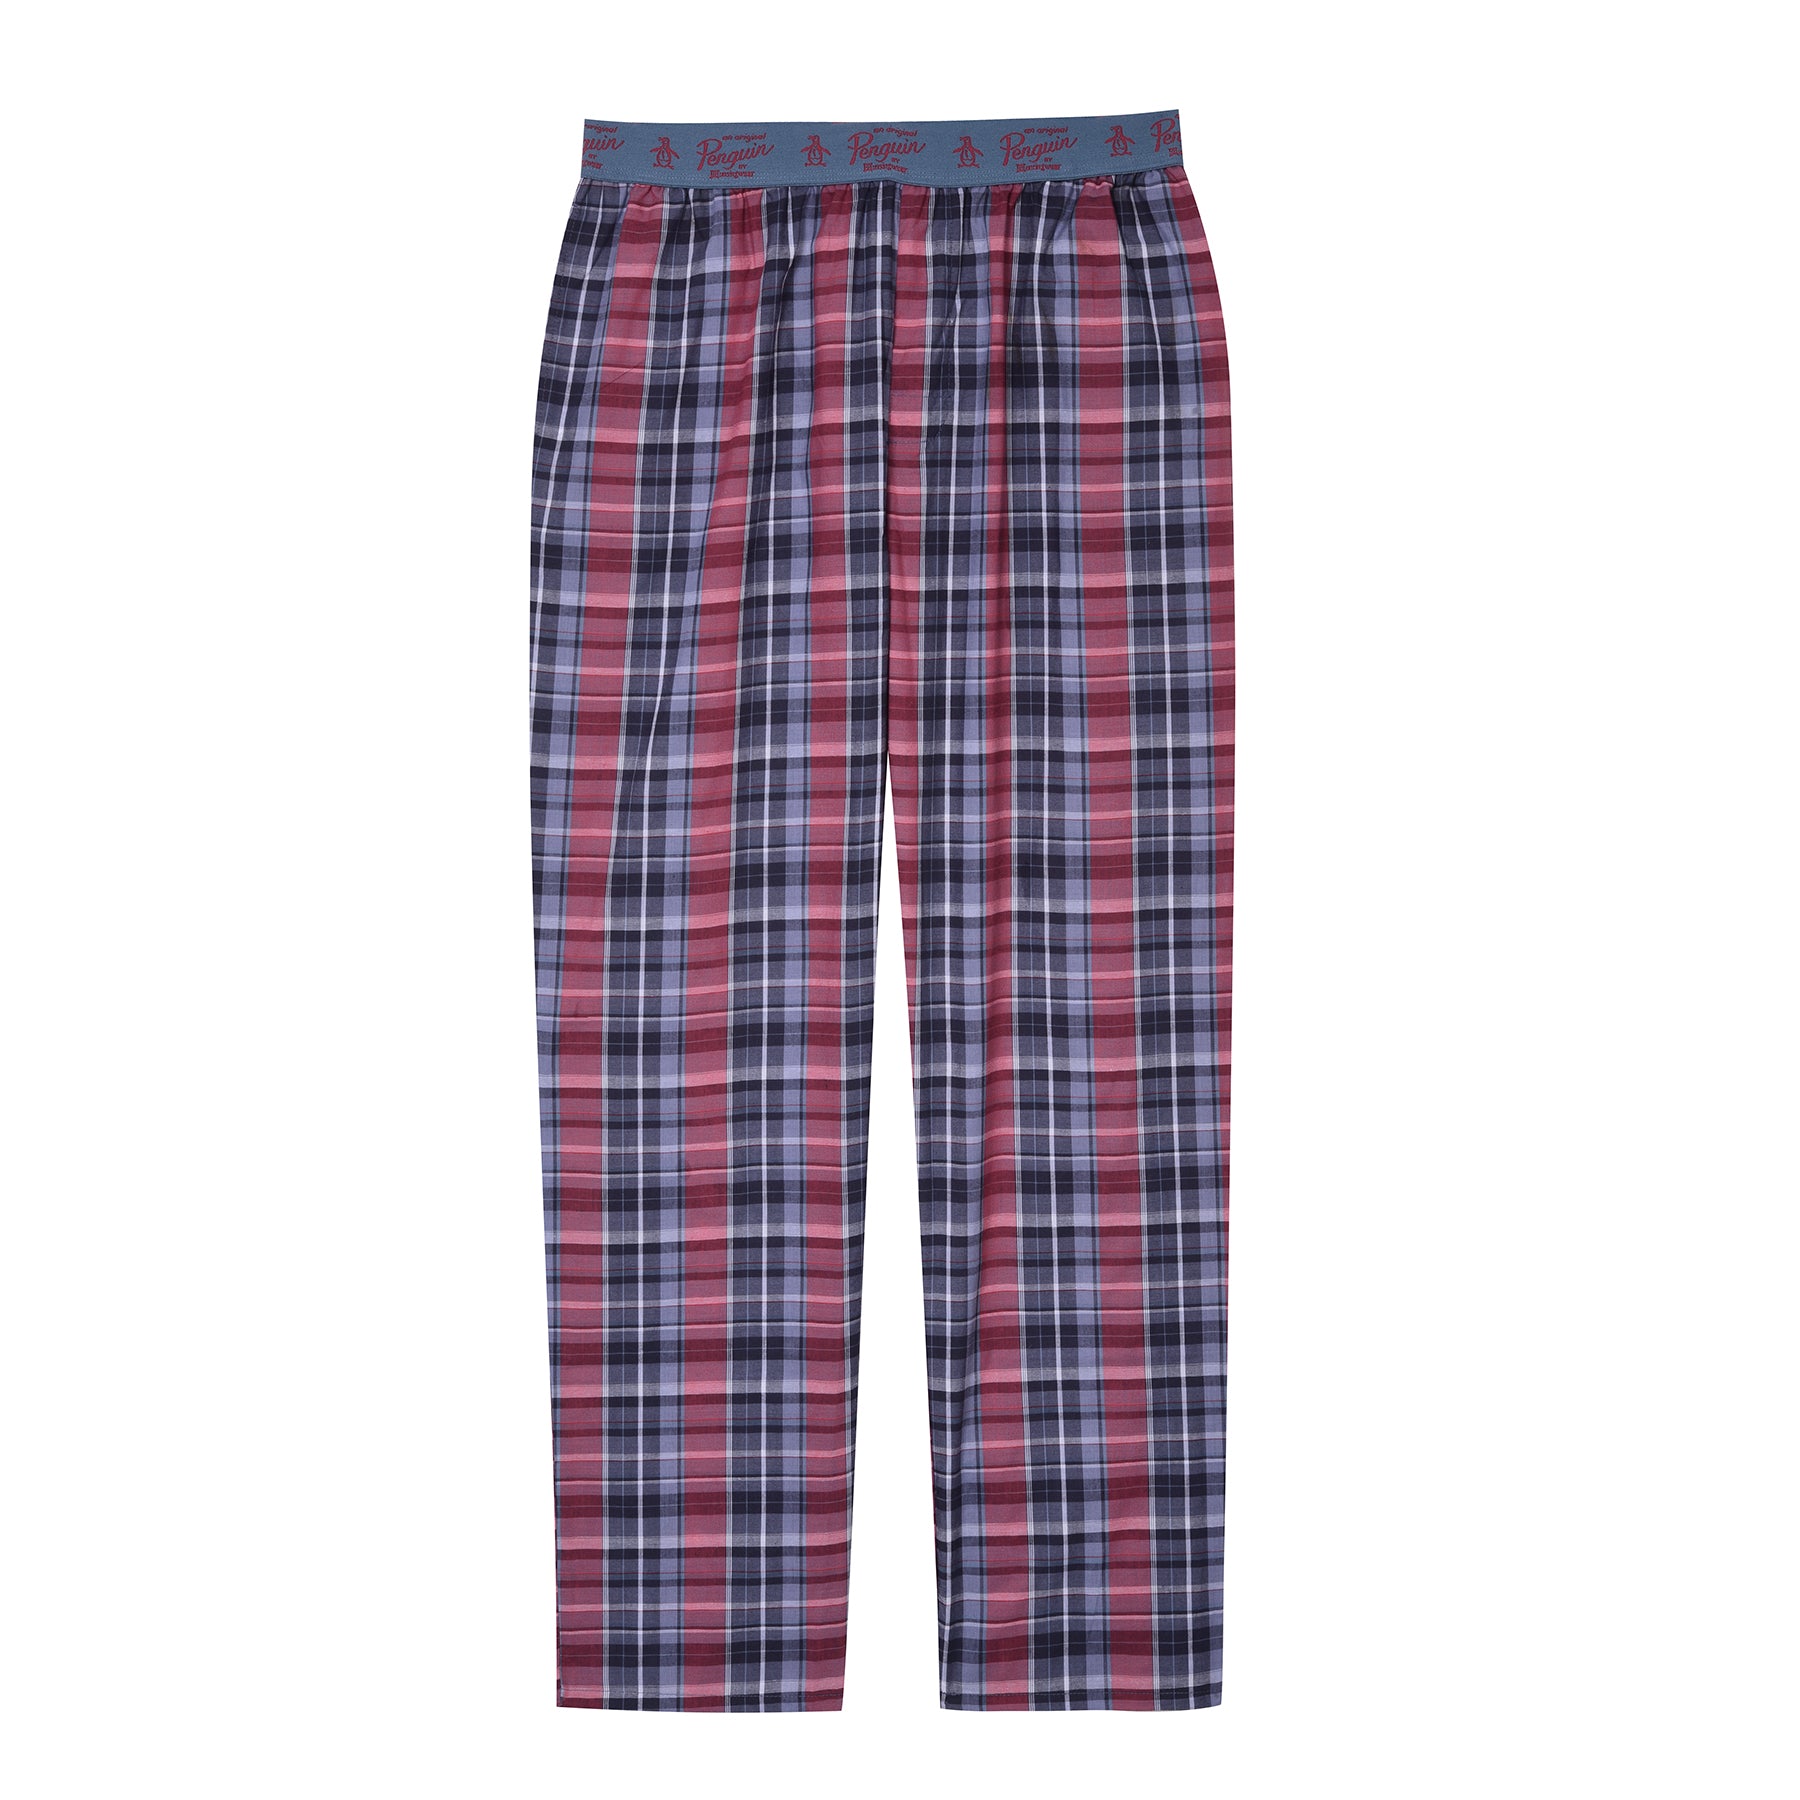 View 1 Pack Penguin Poplin Lounge Pants In Red information